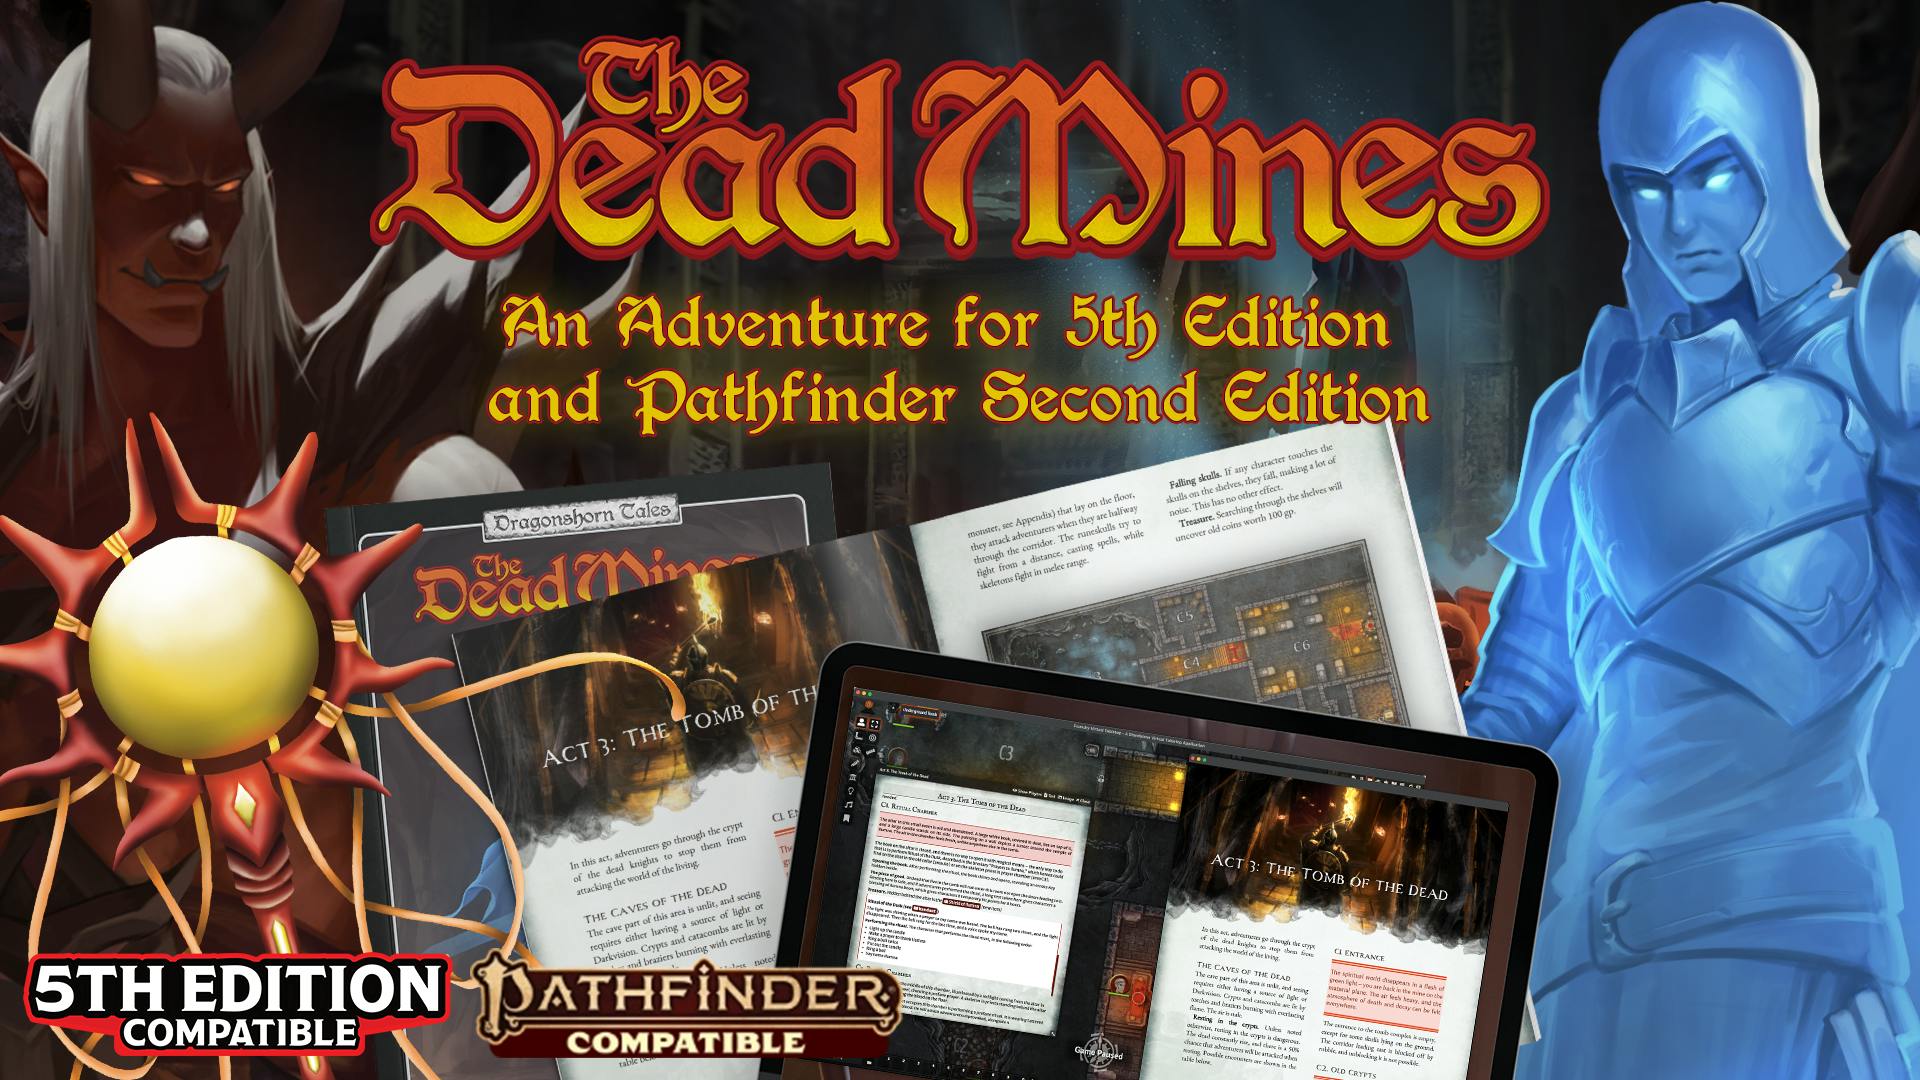 The Dead Mines: Reforged